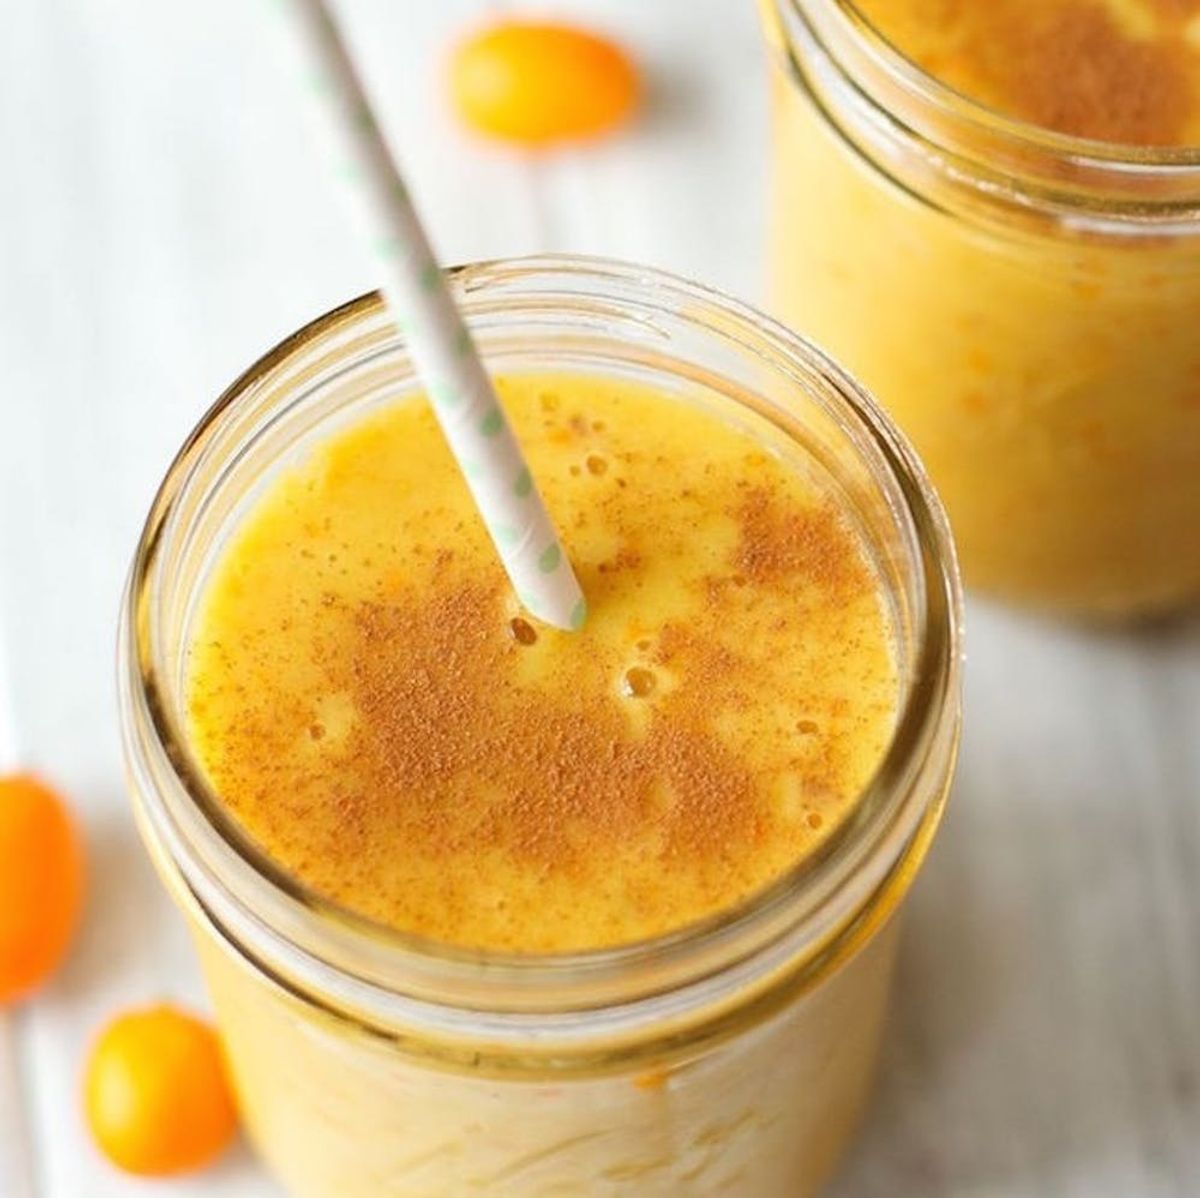 14 Skinny Smoothies to Satisfy Your Sweet Tooth